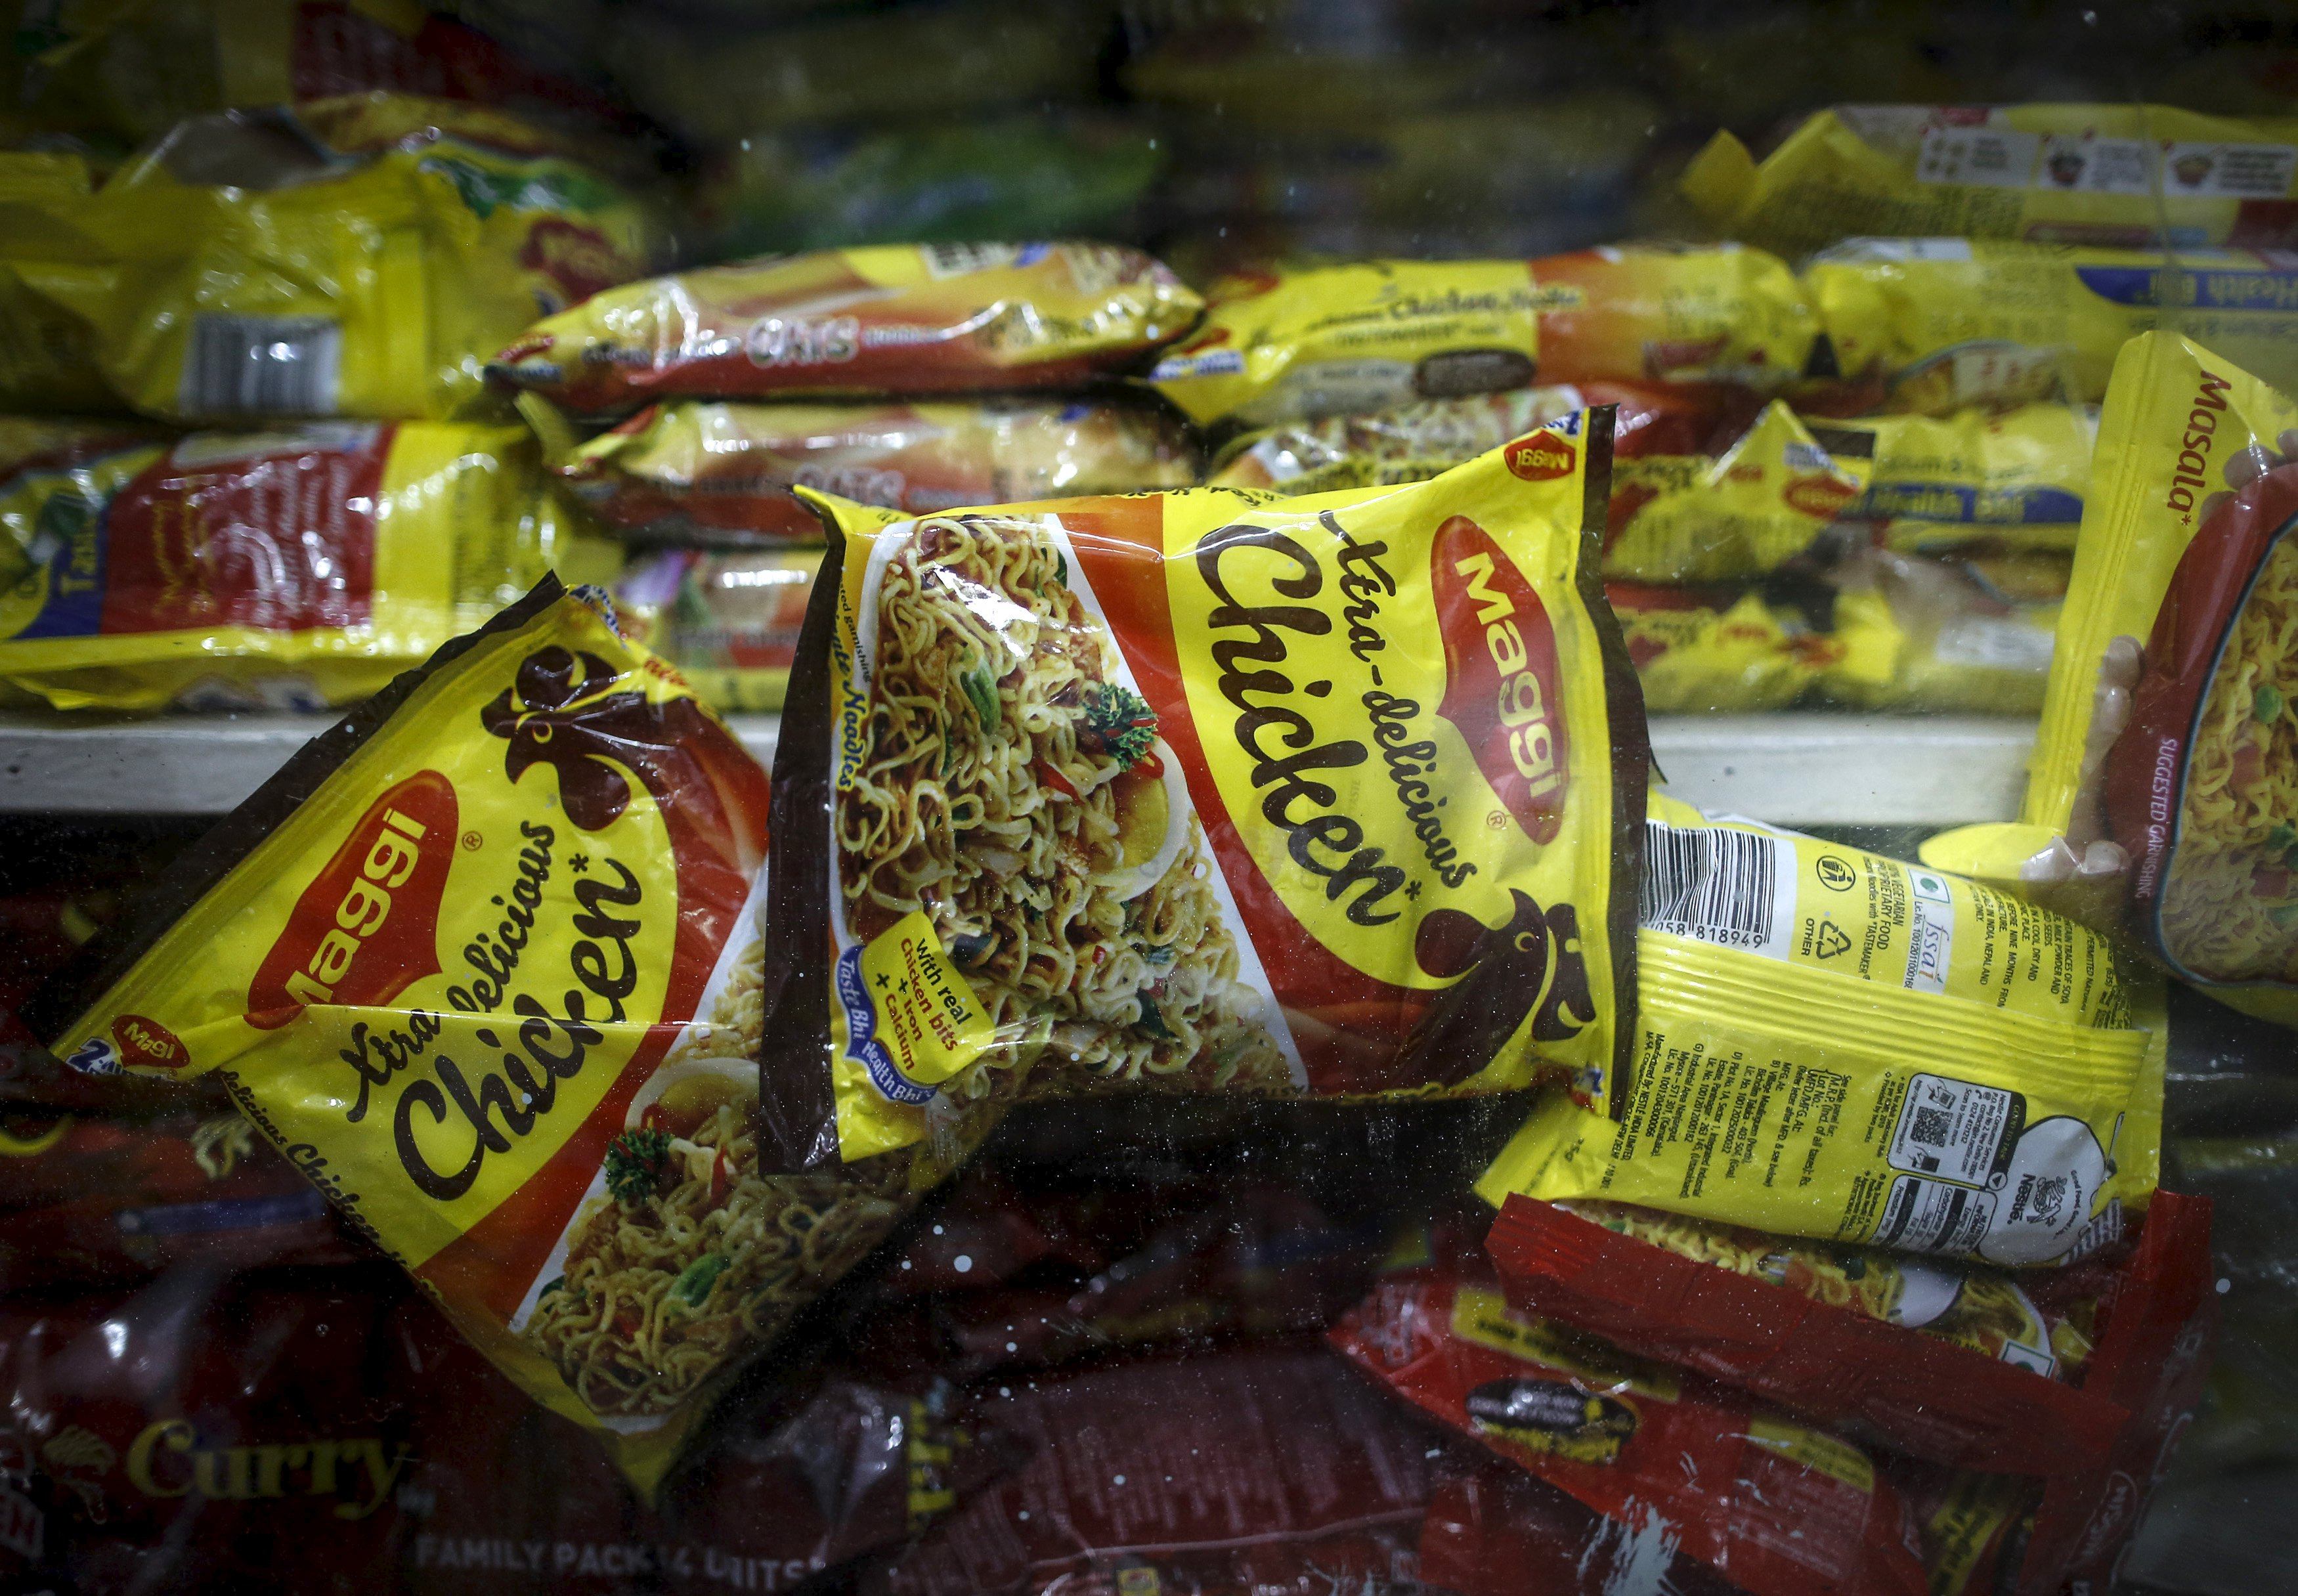 Packets of Nestle’s Maggi instant noodles are seen on display at a grocery store in Mumbai. Photo: Reuters